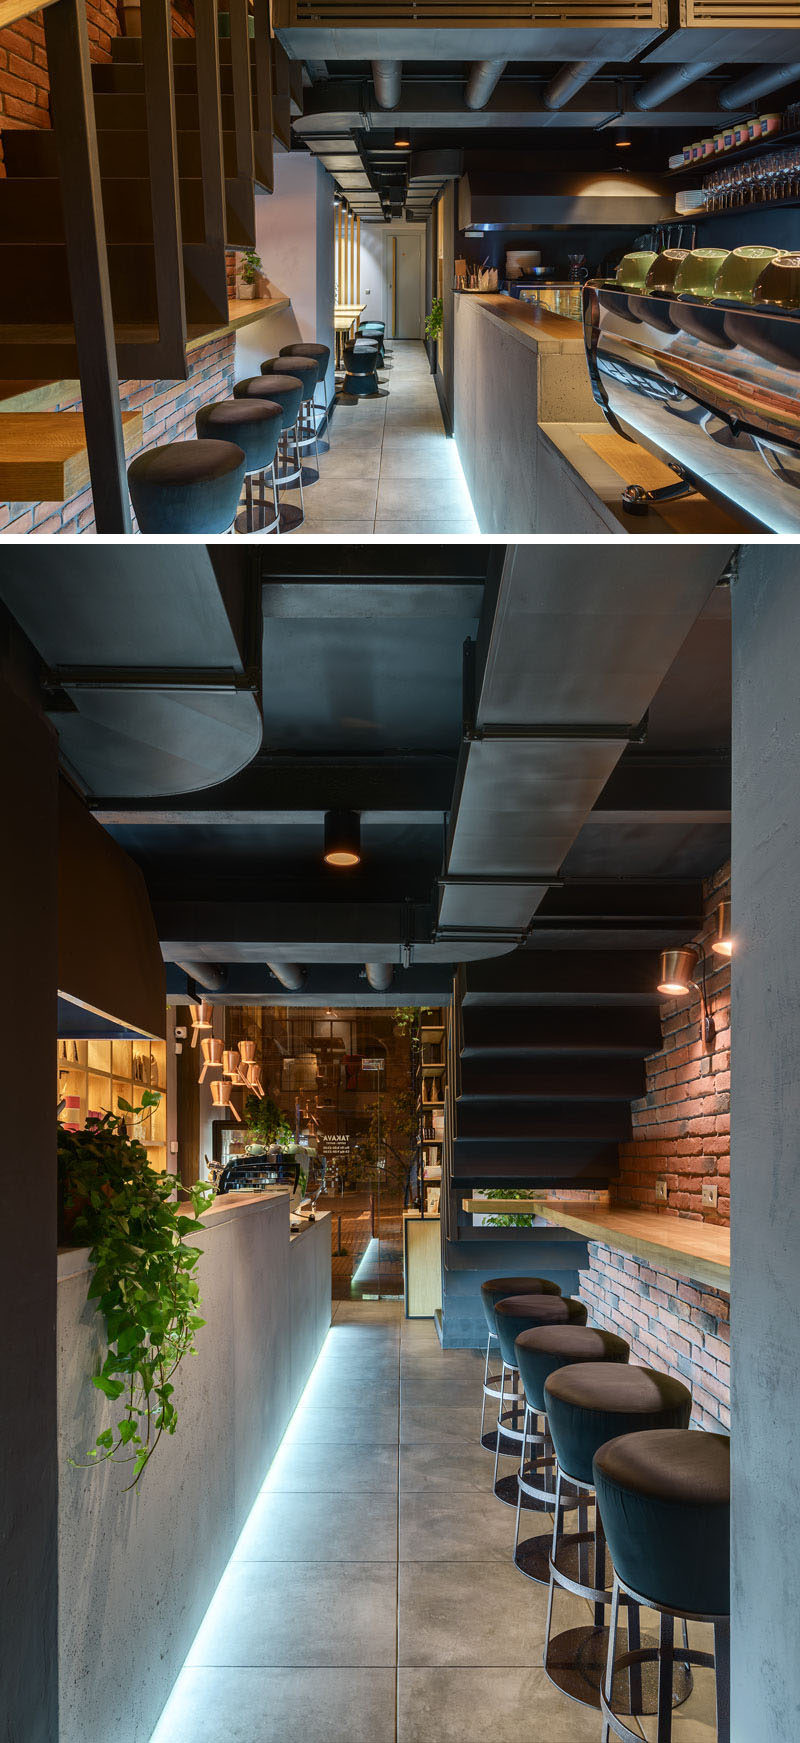 Located under the stairs in this modern coffee shop, is a small nook that's large enough for some bar seating. #BarSeating #CoffeeShop